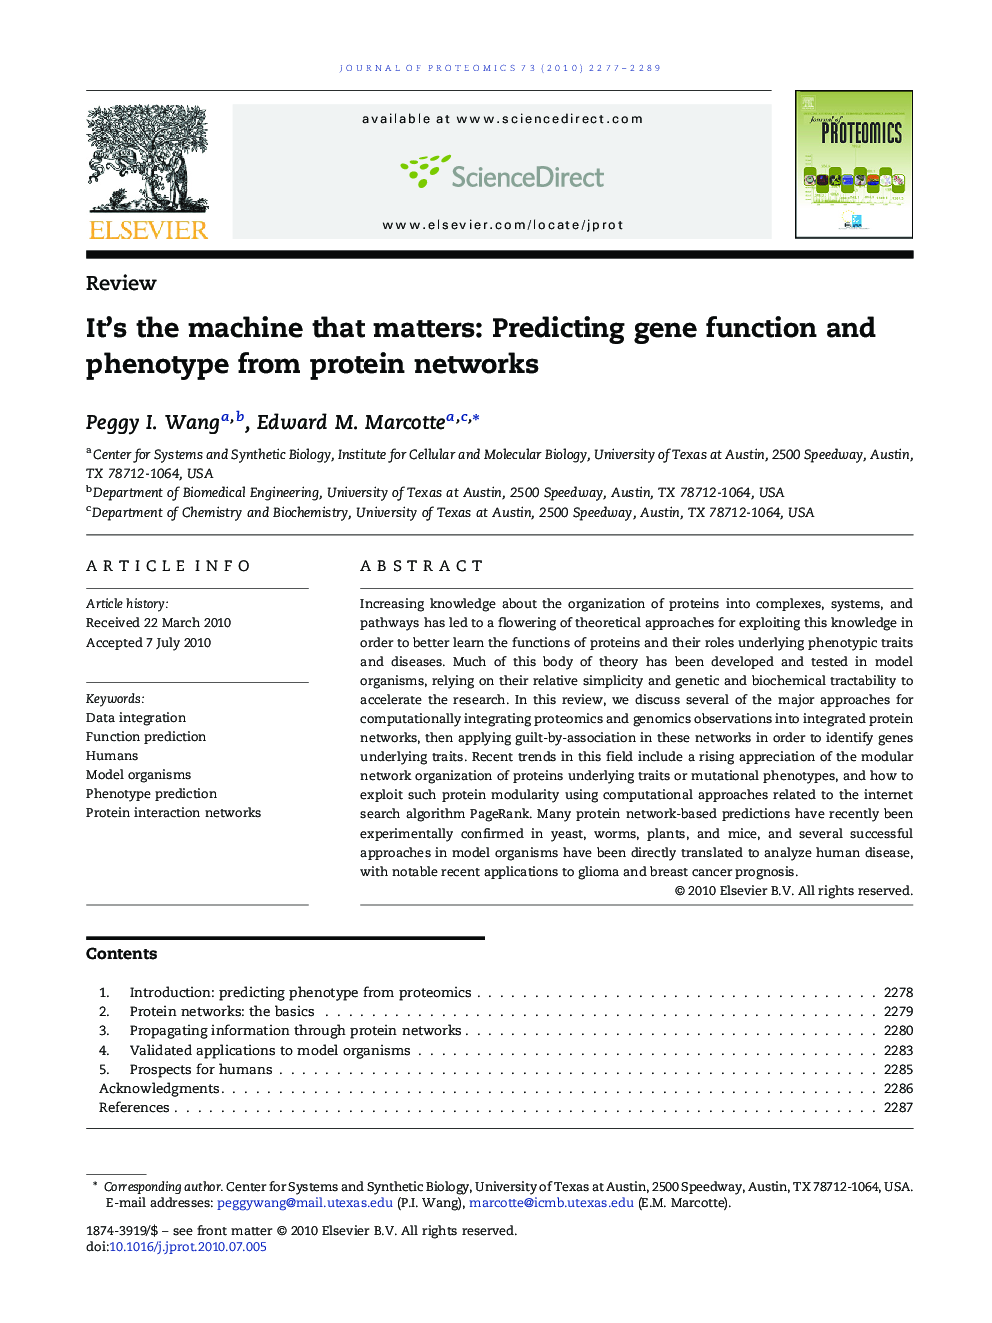 It's the machine that matters: Predicting gene function and phenotype from protein networks